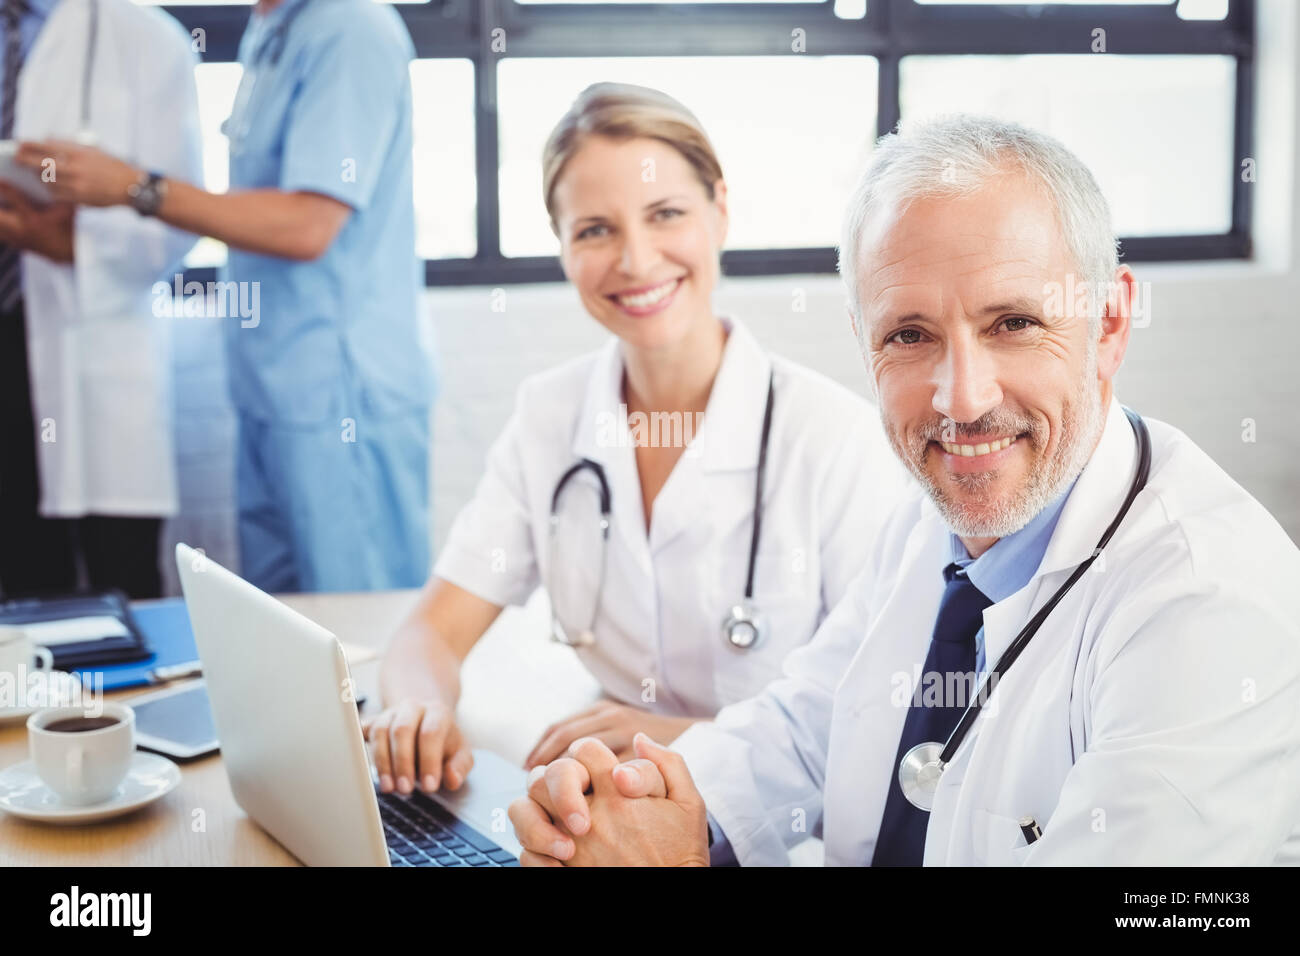 Portrait of two doctors smiling in conference room Stock Photo Alamy